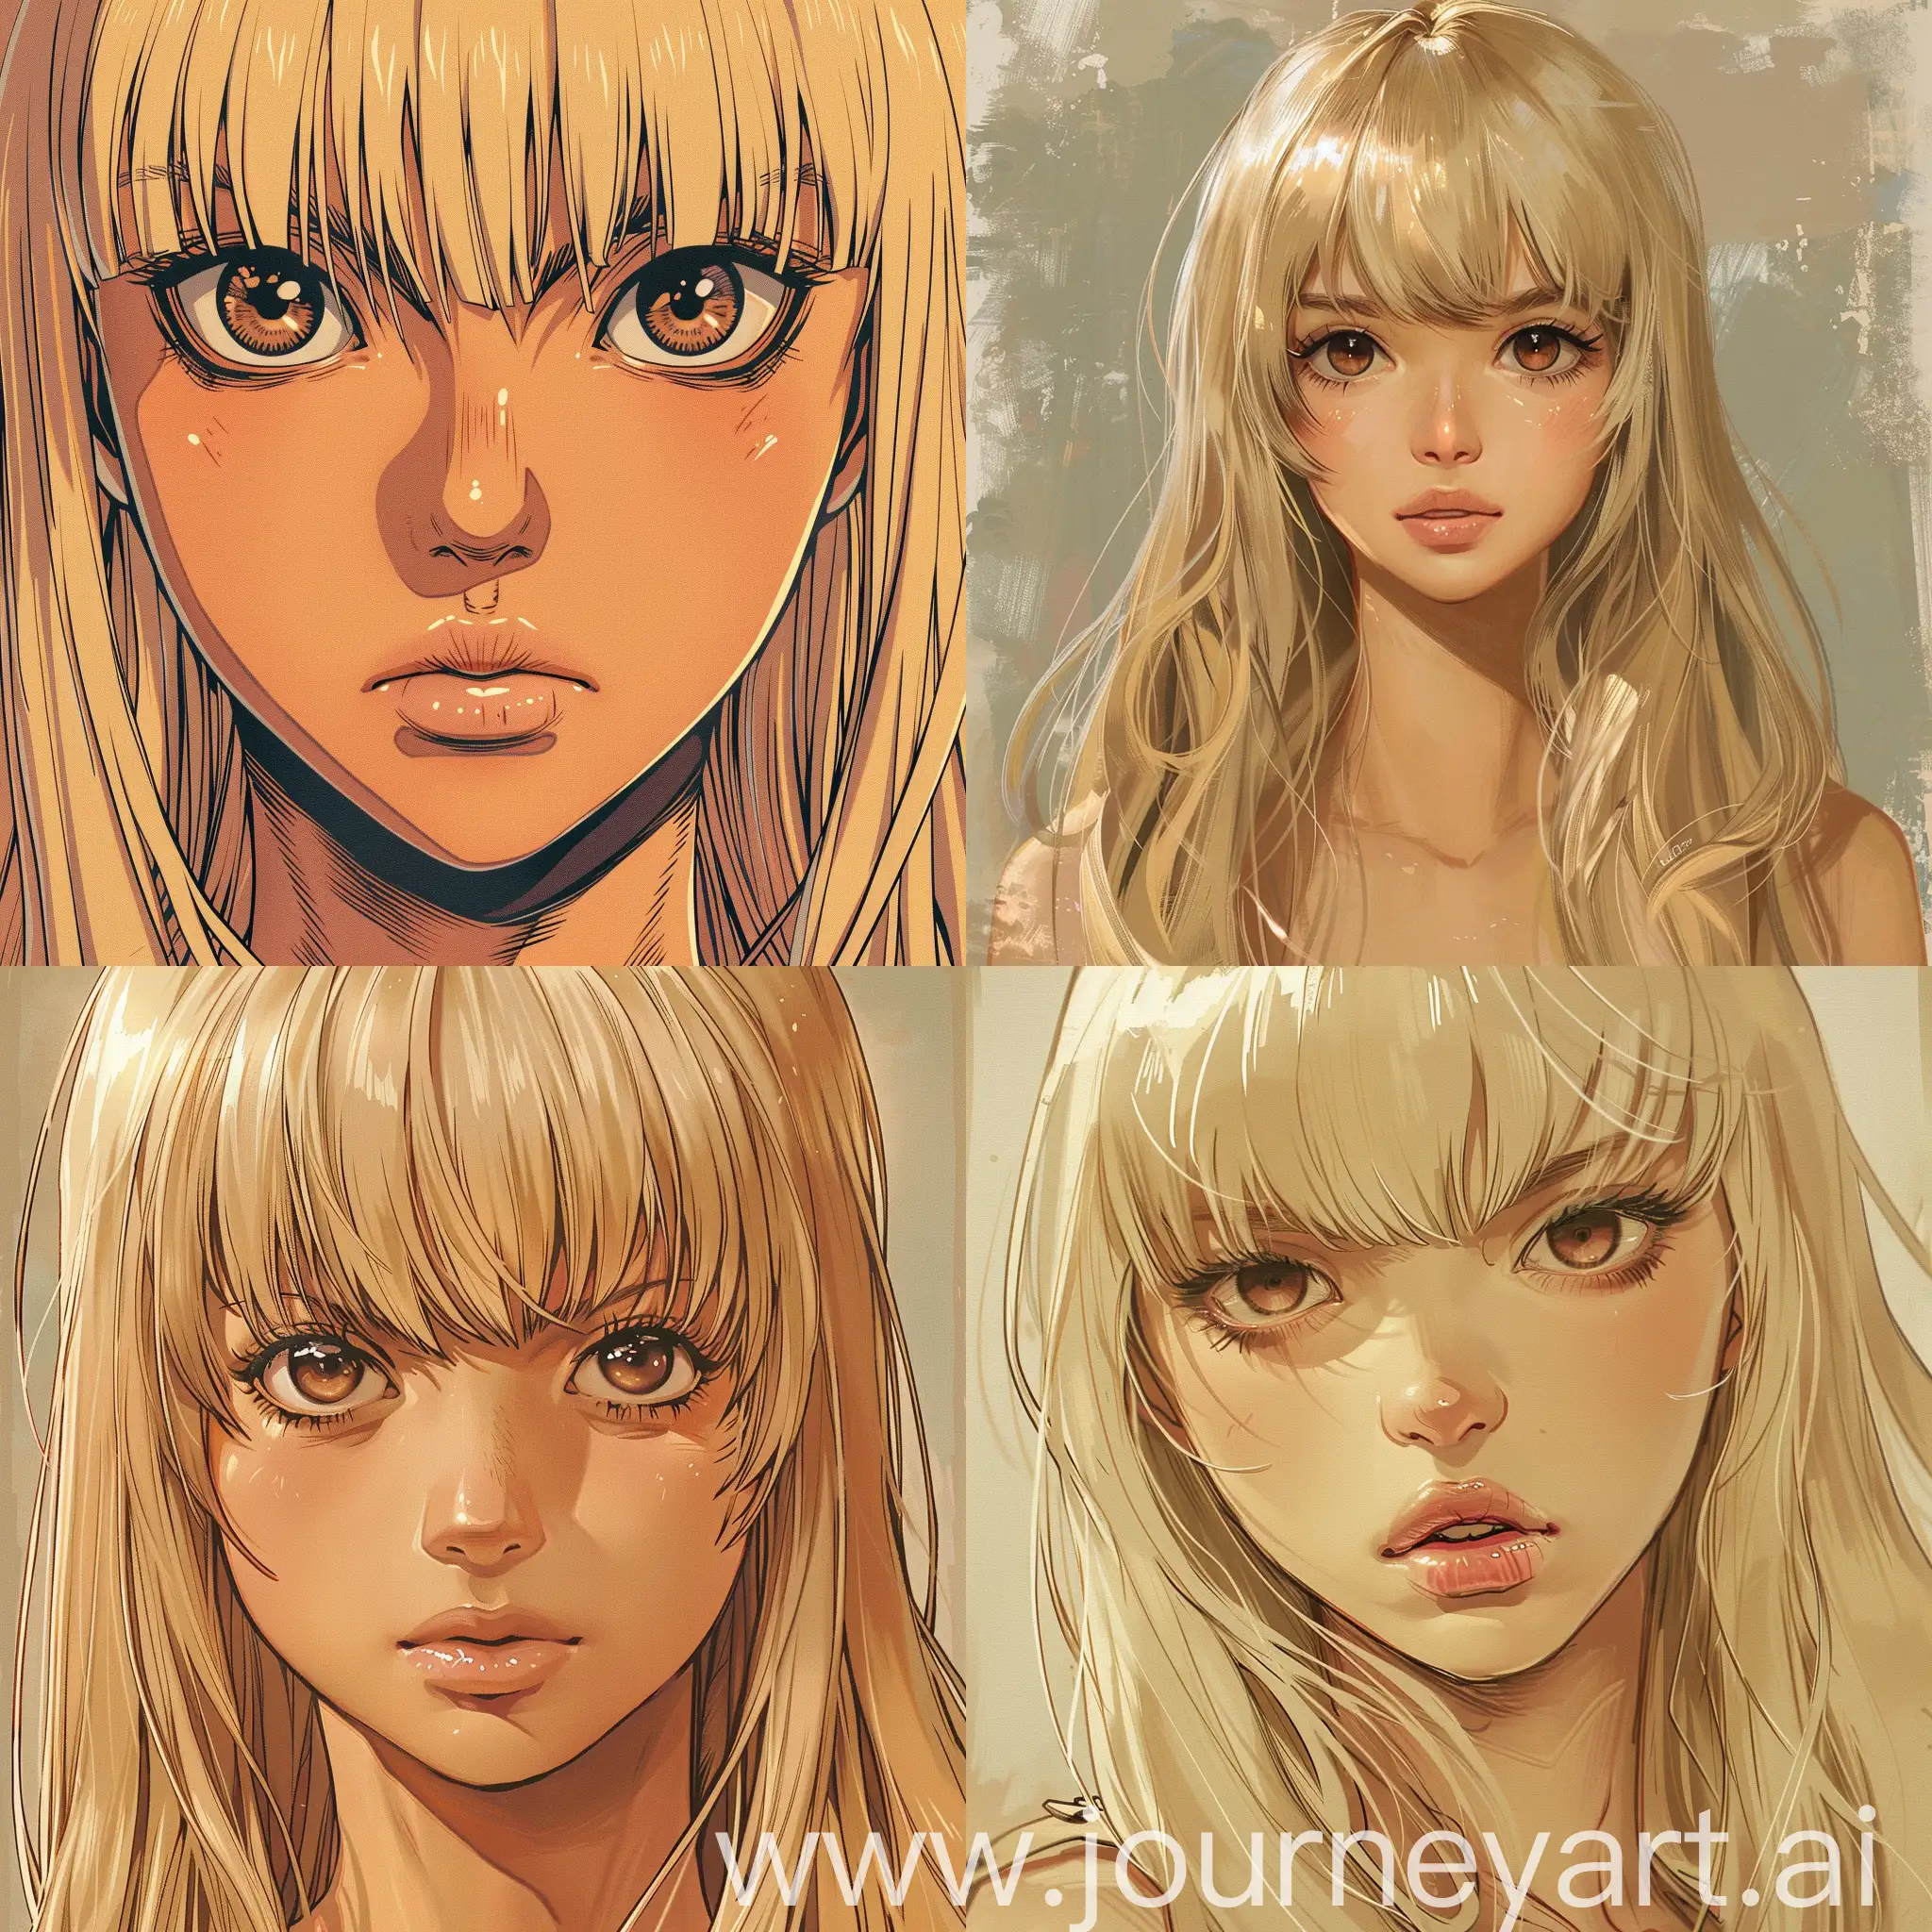 Attack on Titan, Shingeki no Kyojin, beautiful young blonde girl, long hair with bangs, sharp eyes, tan skin, warm brown eyes, upturned nose, thick lips, smart, soft eyebrows, head, muted pastel colors, detailed, retro style